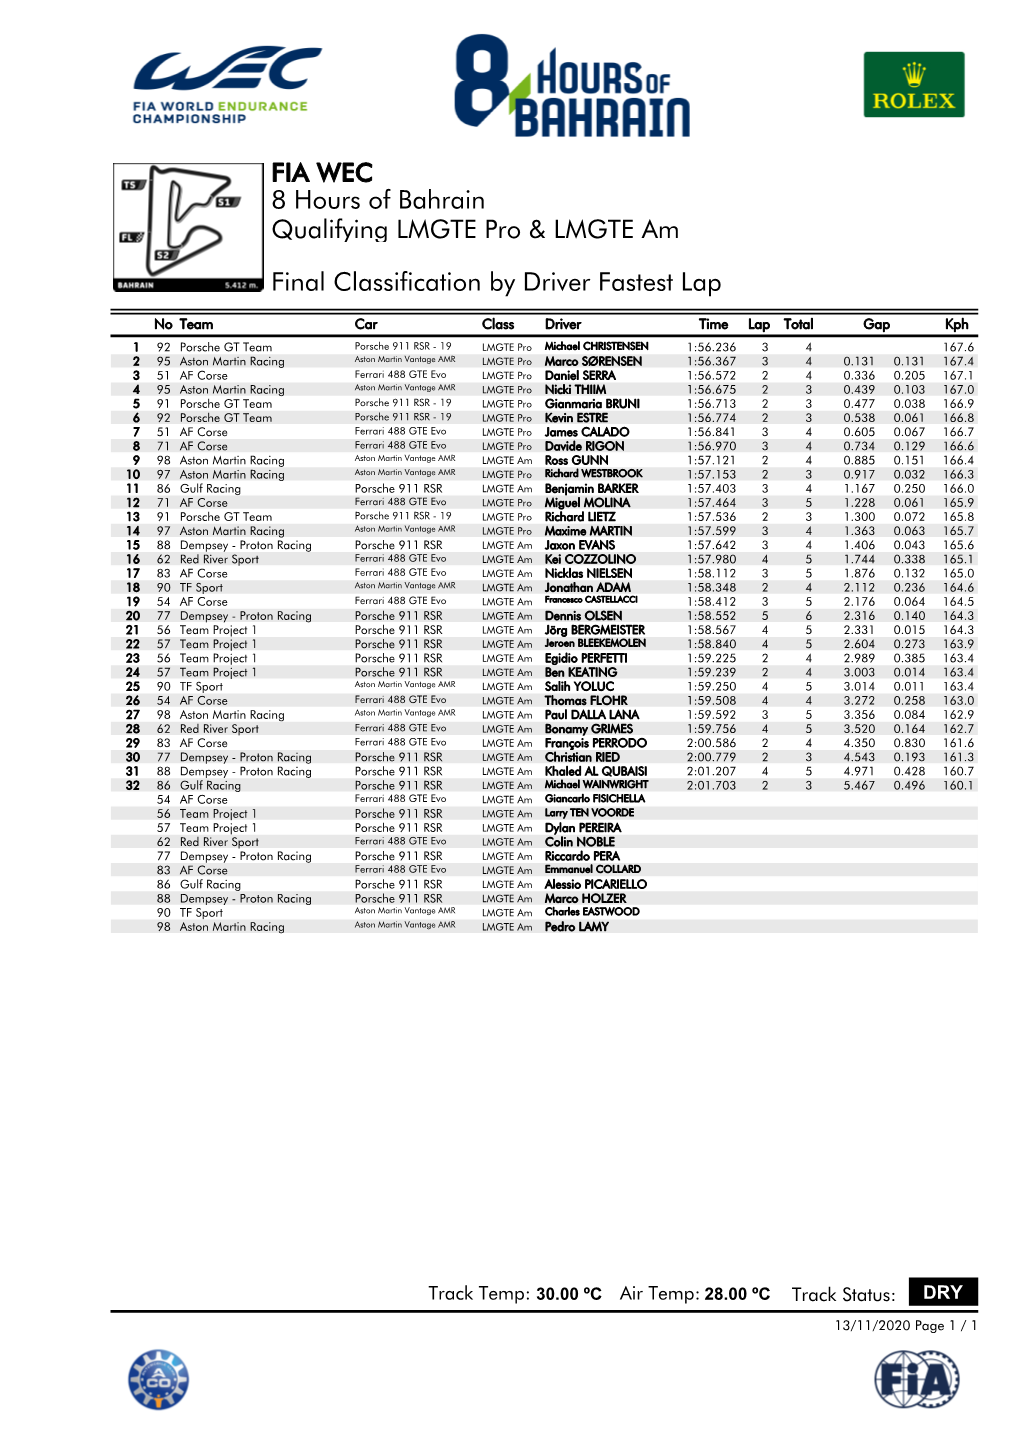 Final Classification by Driver Fastest Lap Qualifying LMGTE Pro